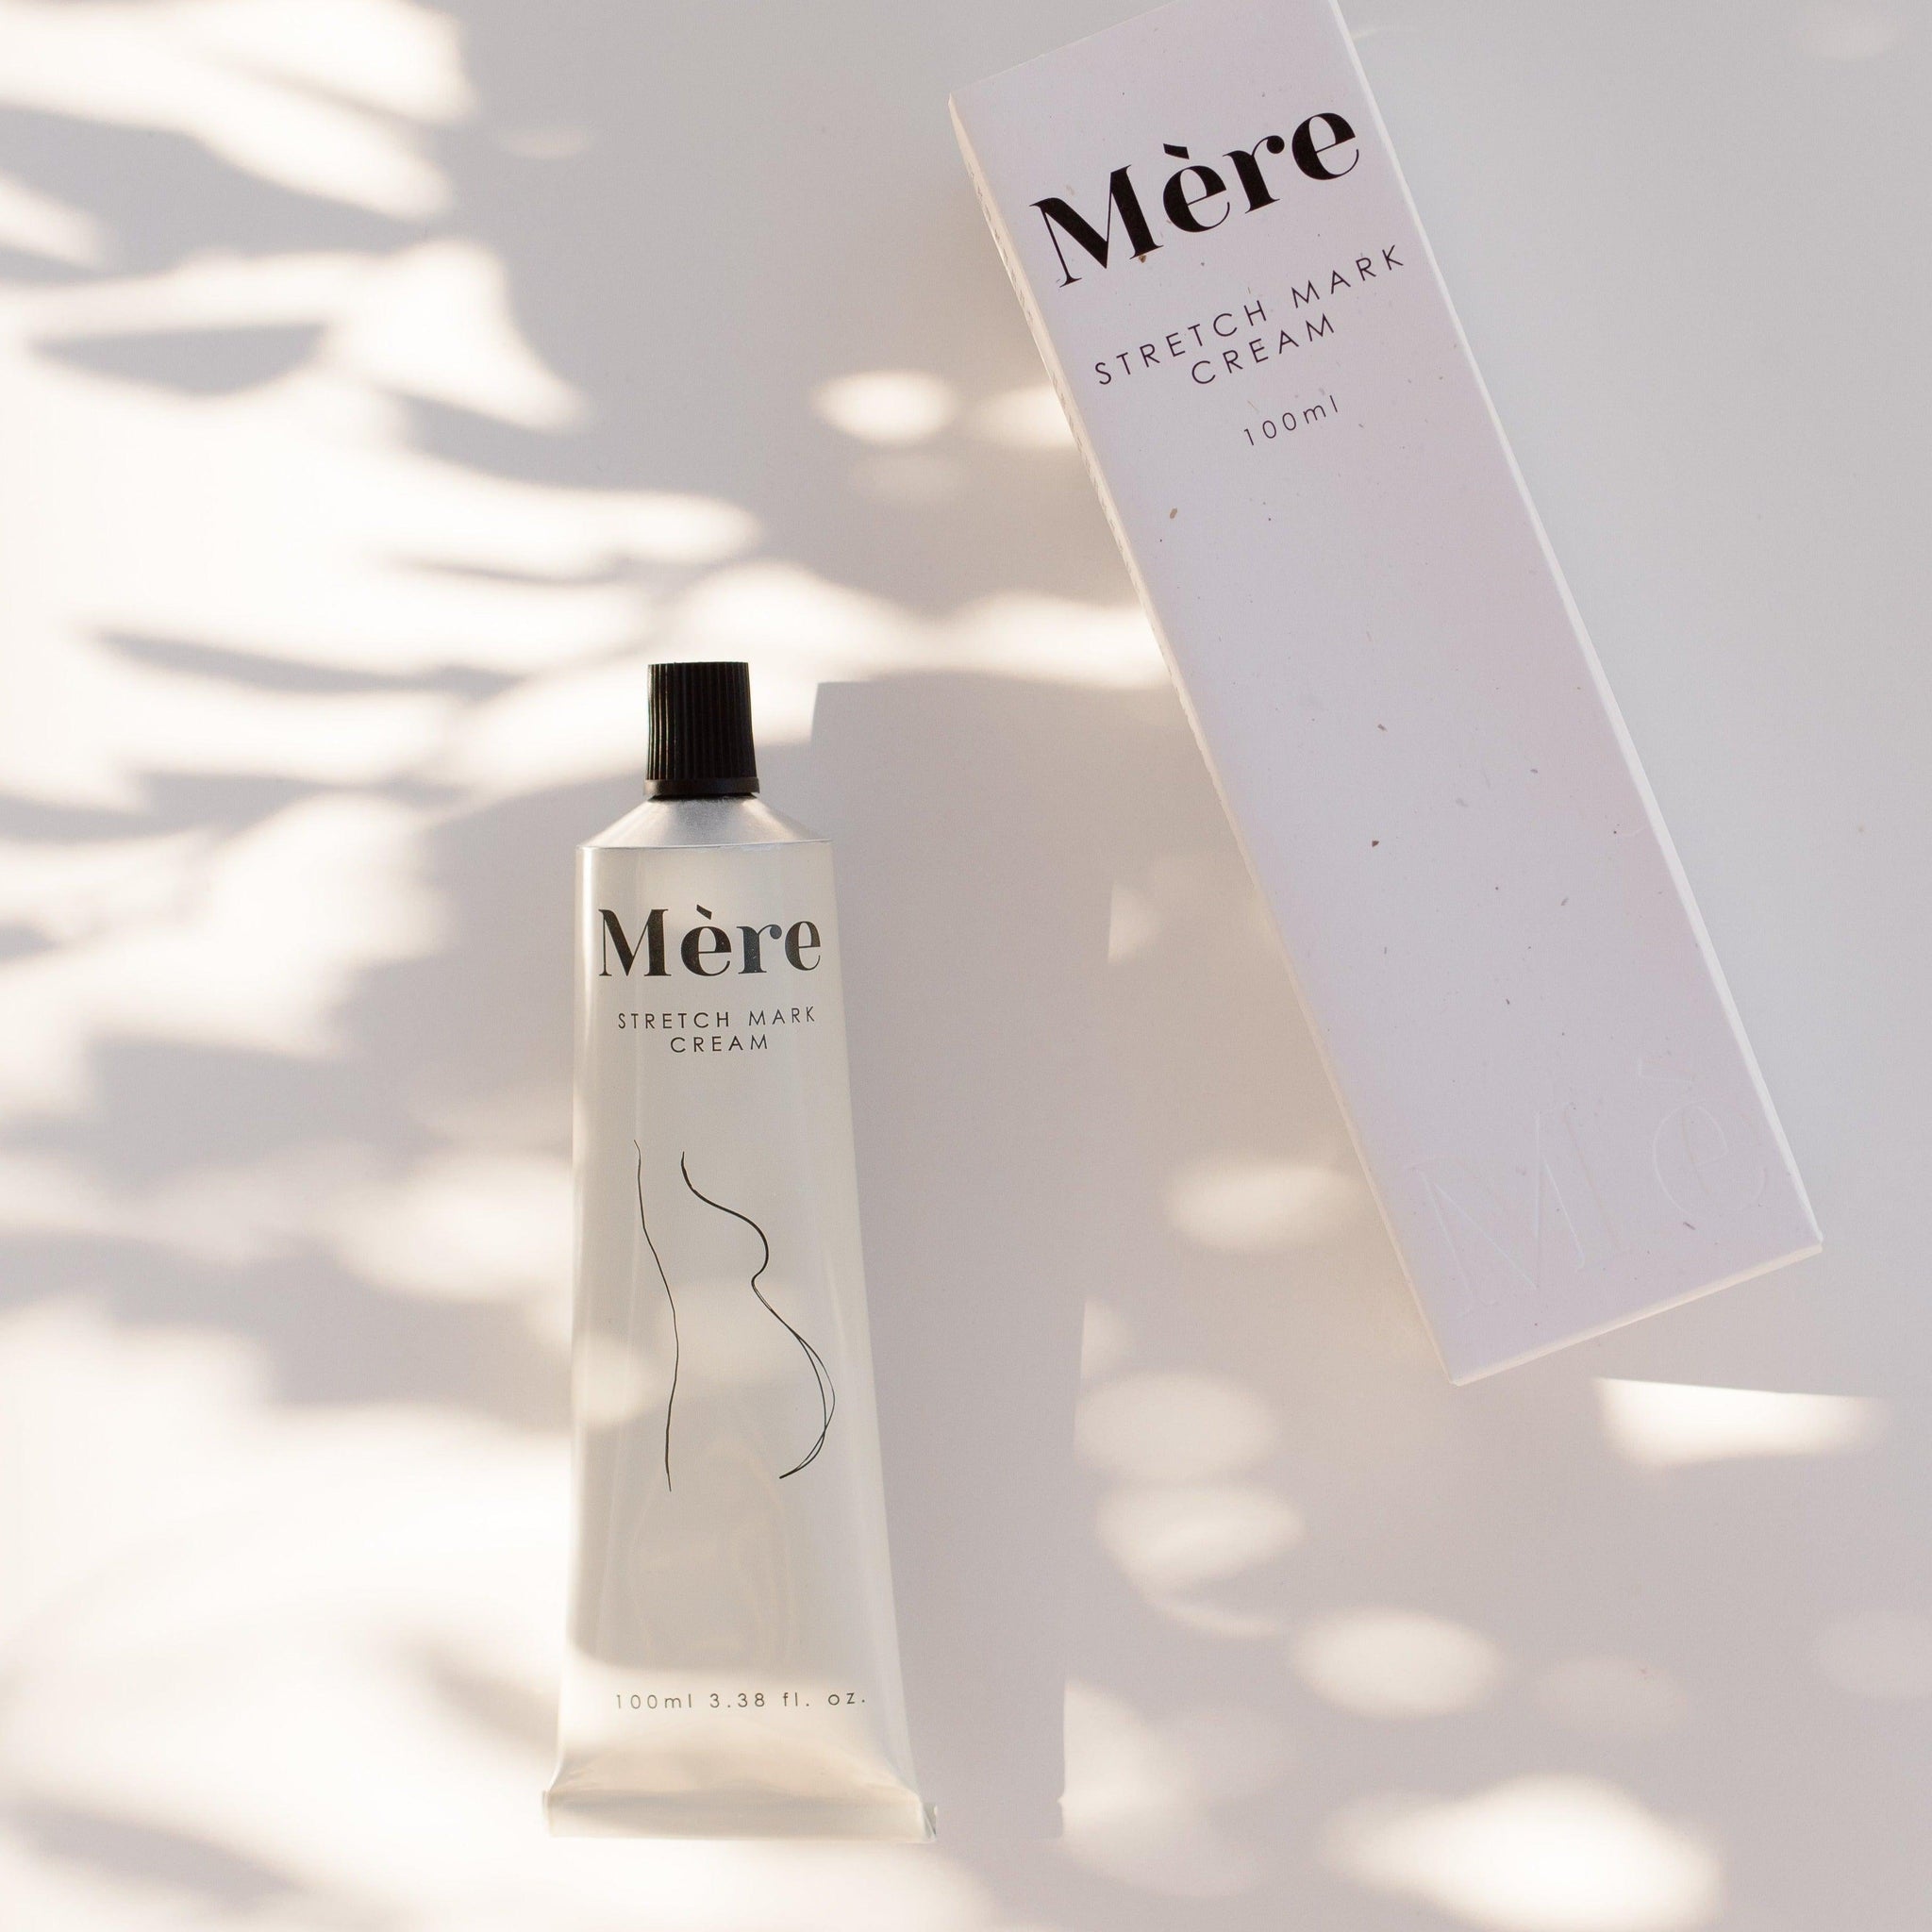 This beautifully formulated, non-greasy formulation of moisturising active botanicals naturally soothes, softens and hydrates. Mère Stretch Mark Cream provides a nurturing foundation of herbs that condition the skin and supports elasticity, blended with hydrating oils.